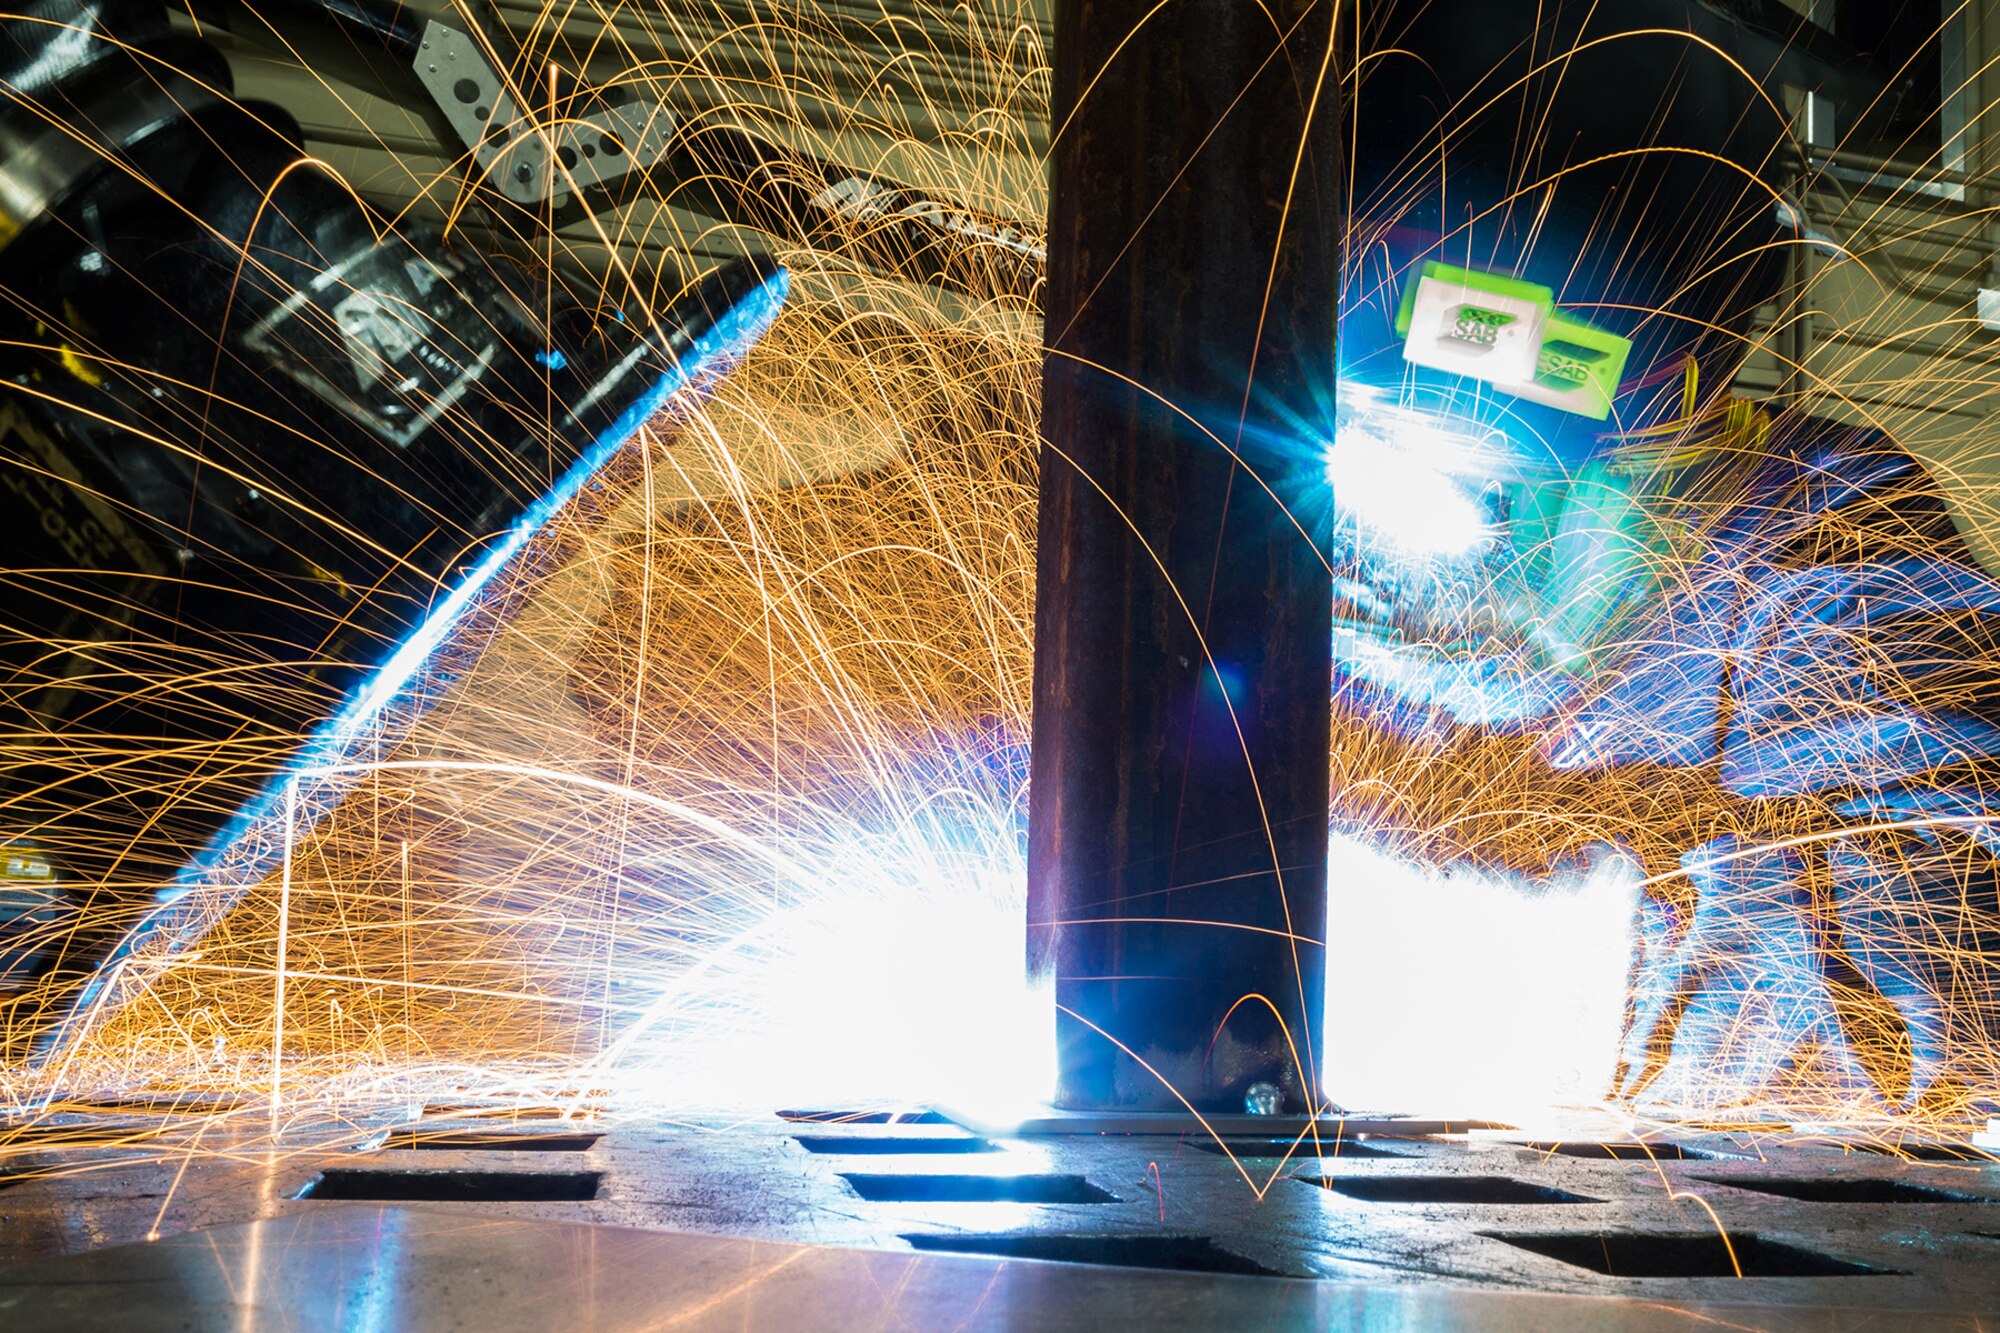 Airman Dalton Sturtz, a native of Seguin, Texas, an aircraft metals technology journeyman assigned to the 3rd Maintenance Squadron, practices welding a metal plate in the metals fabrication shop on Joint Base Elmendorf-Richardson, Alaska, May 9, 2018. Aircraft Metals Technology Airmen measure broken or worn parts, draw working sketches, make templates, perform precision grinding remove poisonous or corrosive deposits from parts, and write programs for machines using manual and computer-aided manufacturing.